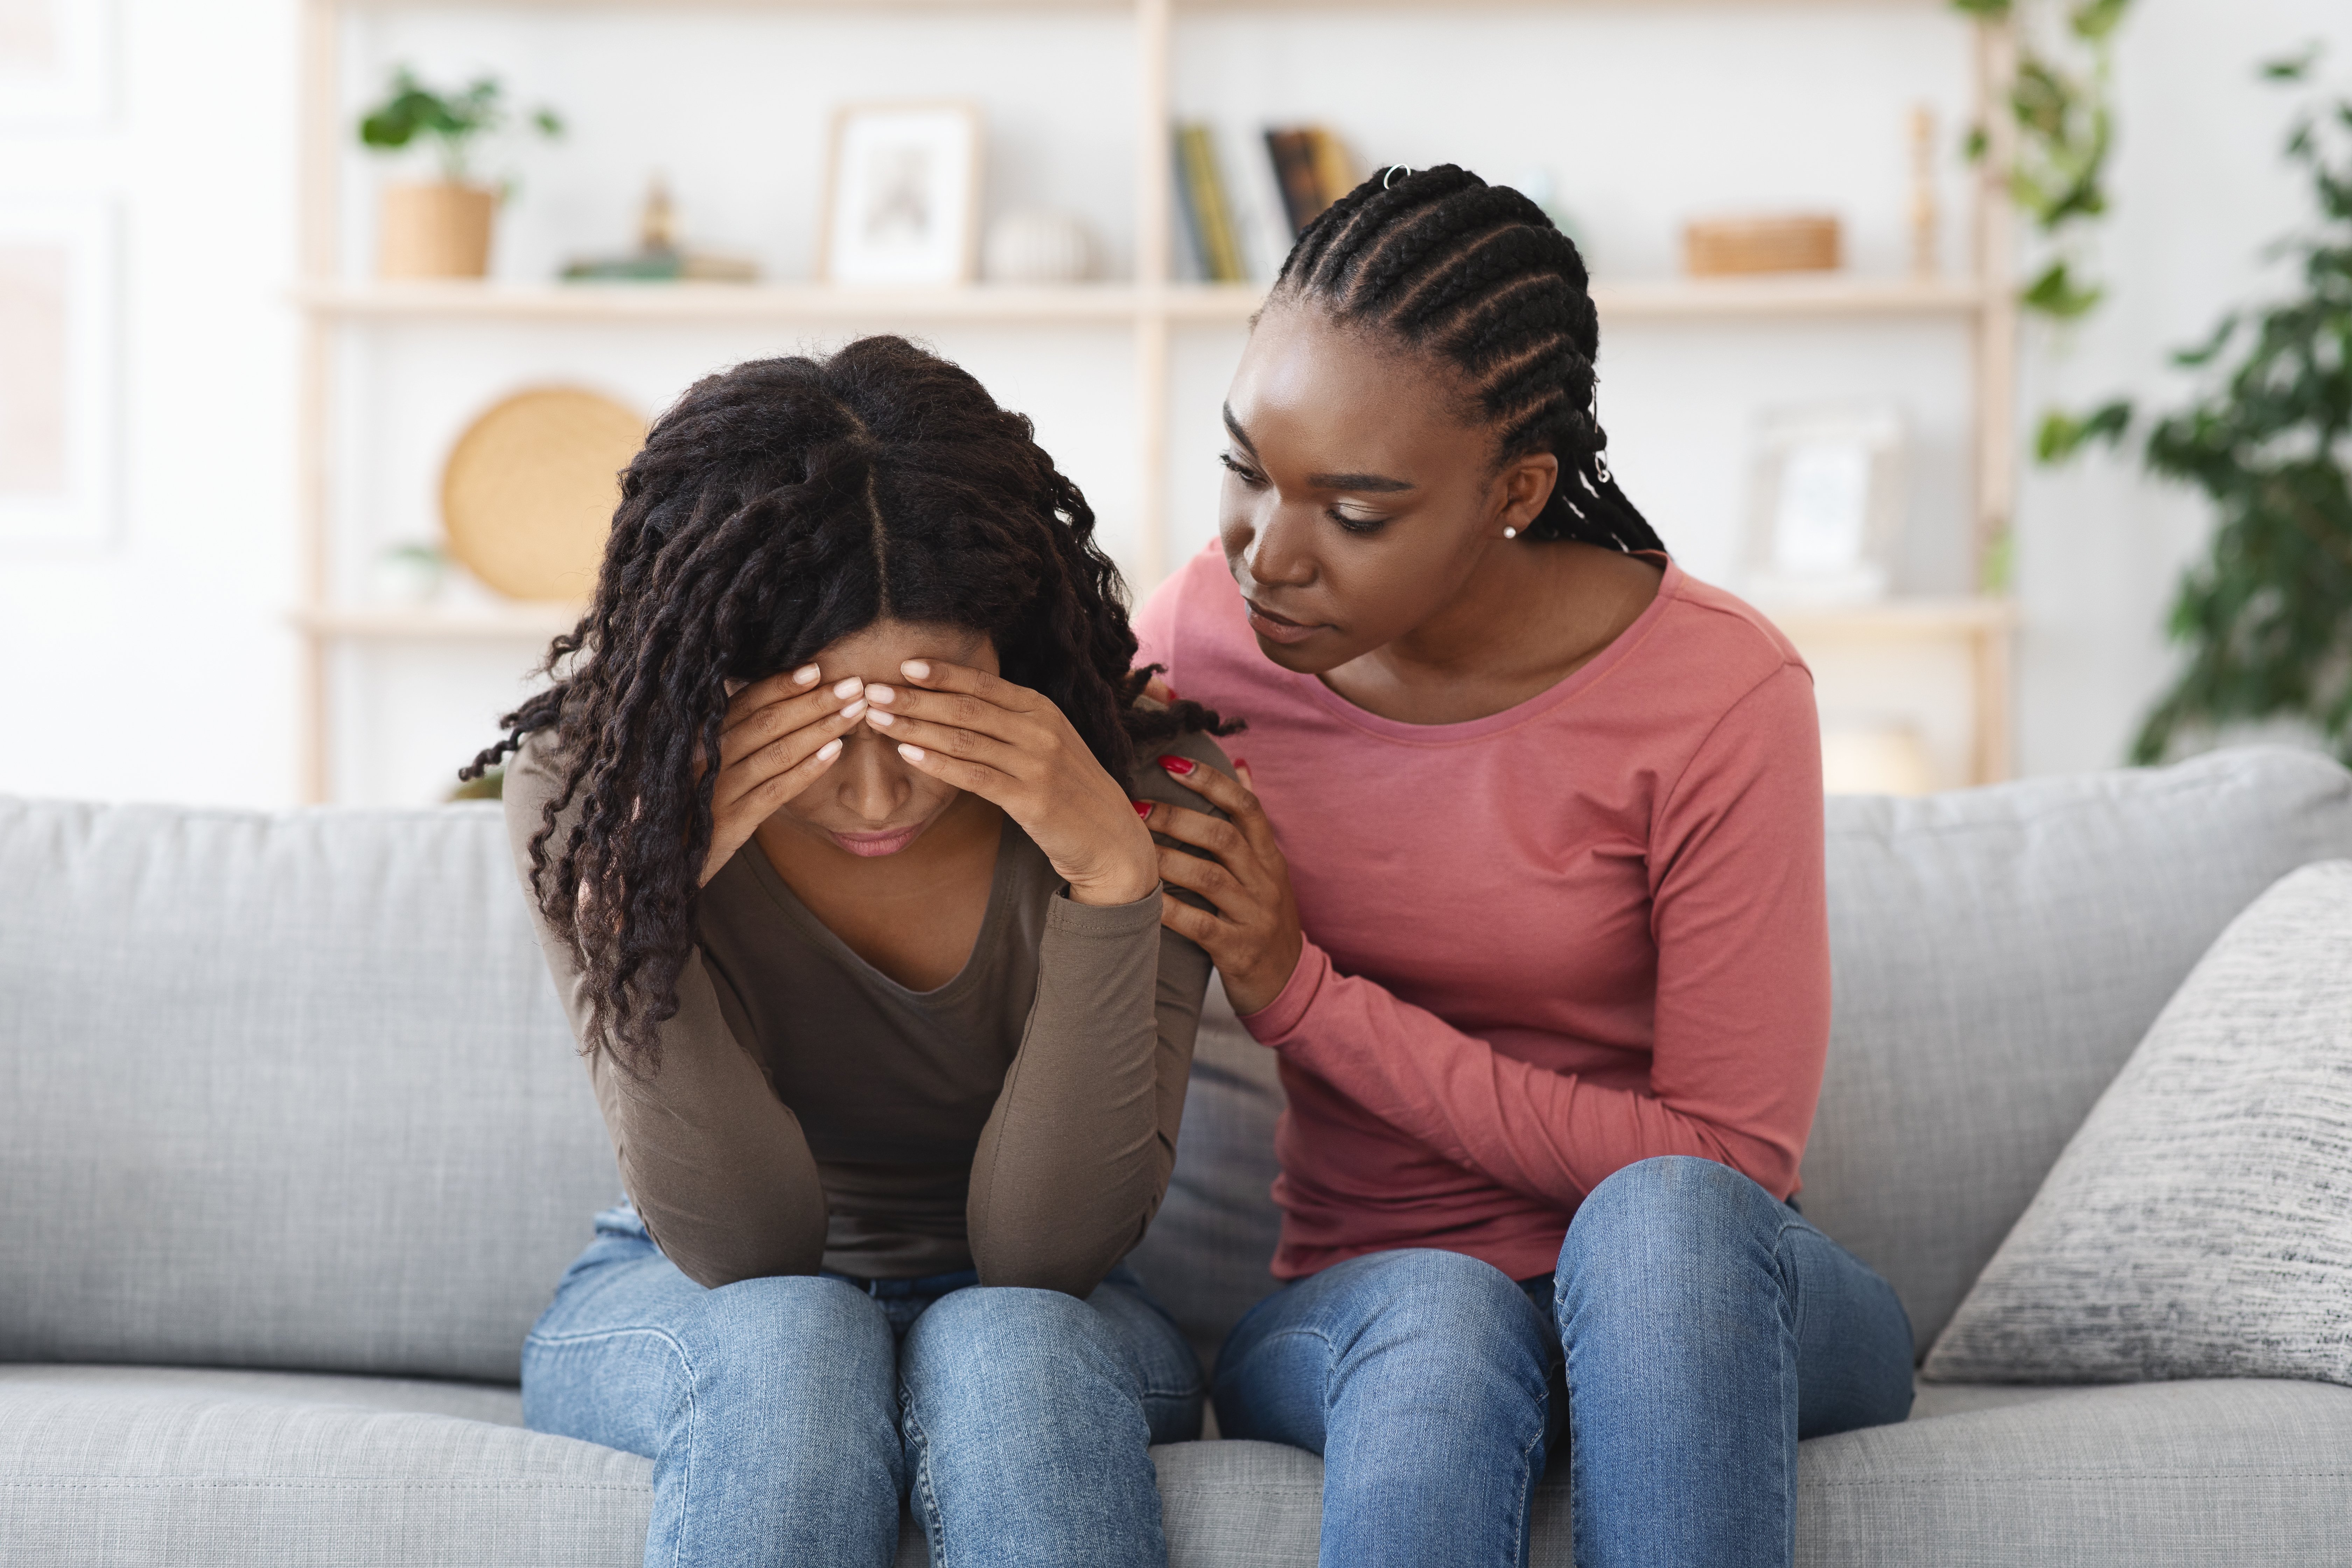 Attentive african american lady comforting her upset crying girlfriend or sister, giving her hug, saying supportive words.